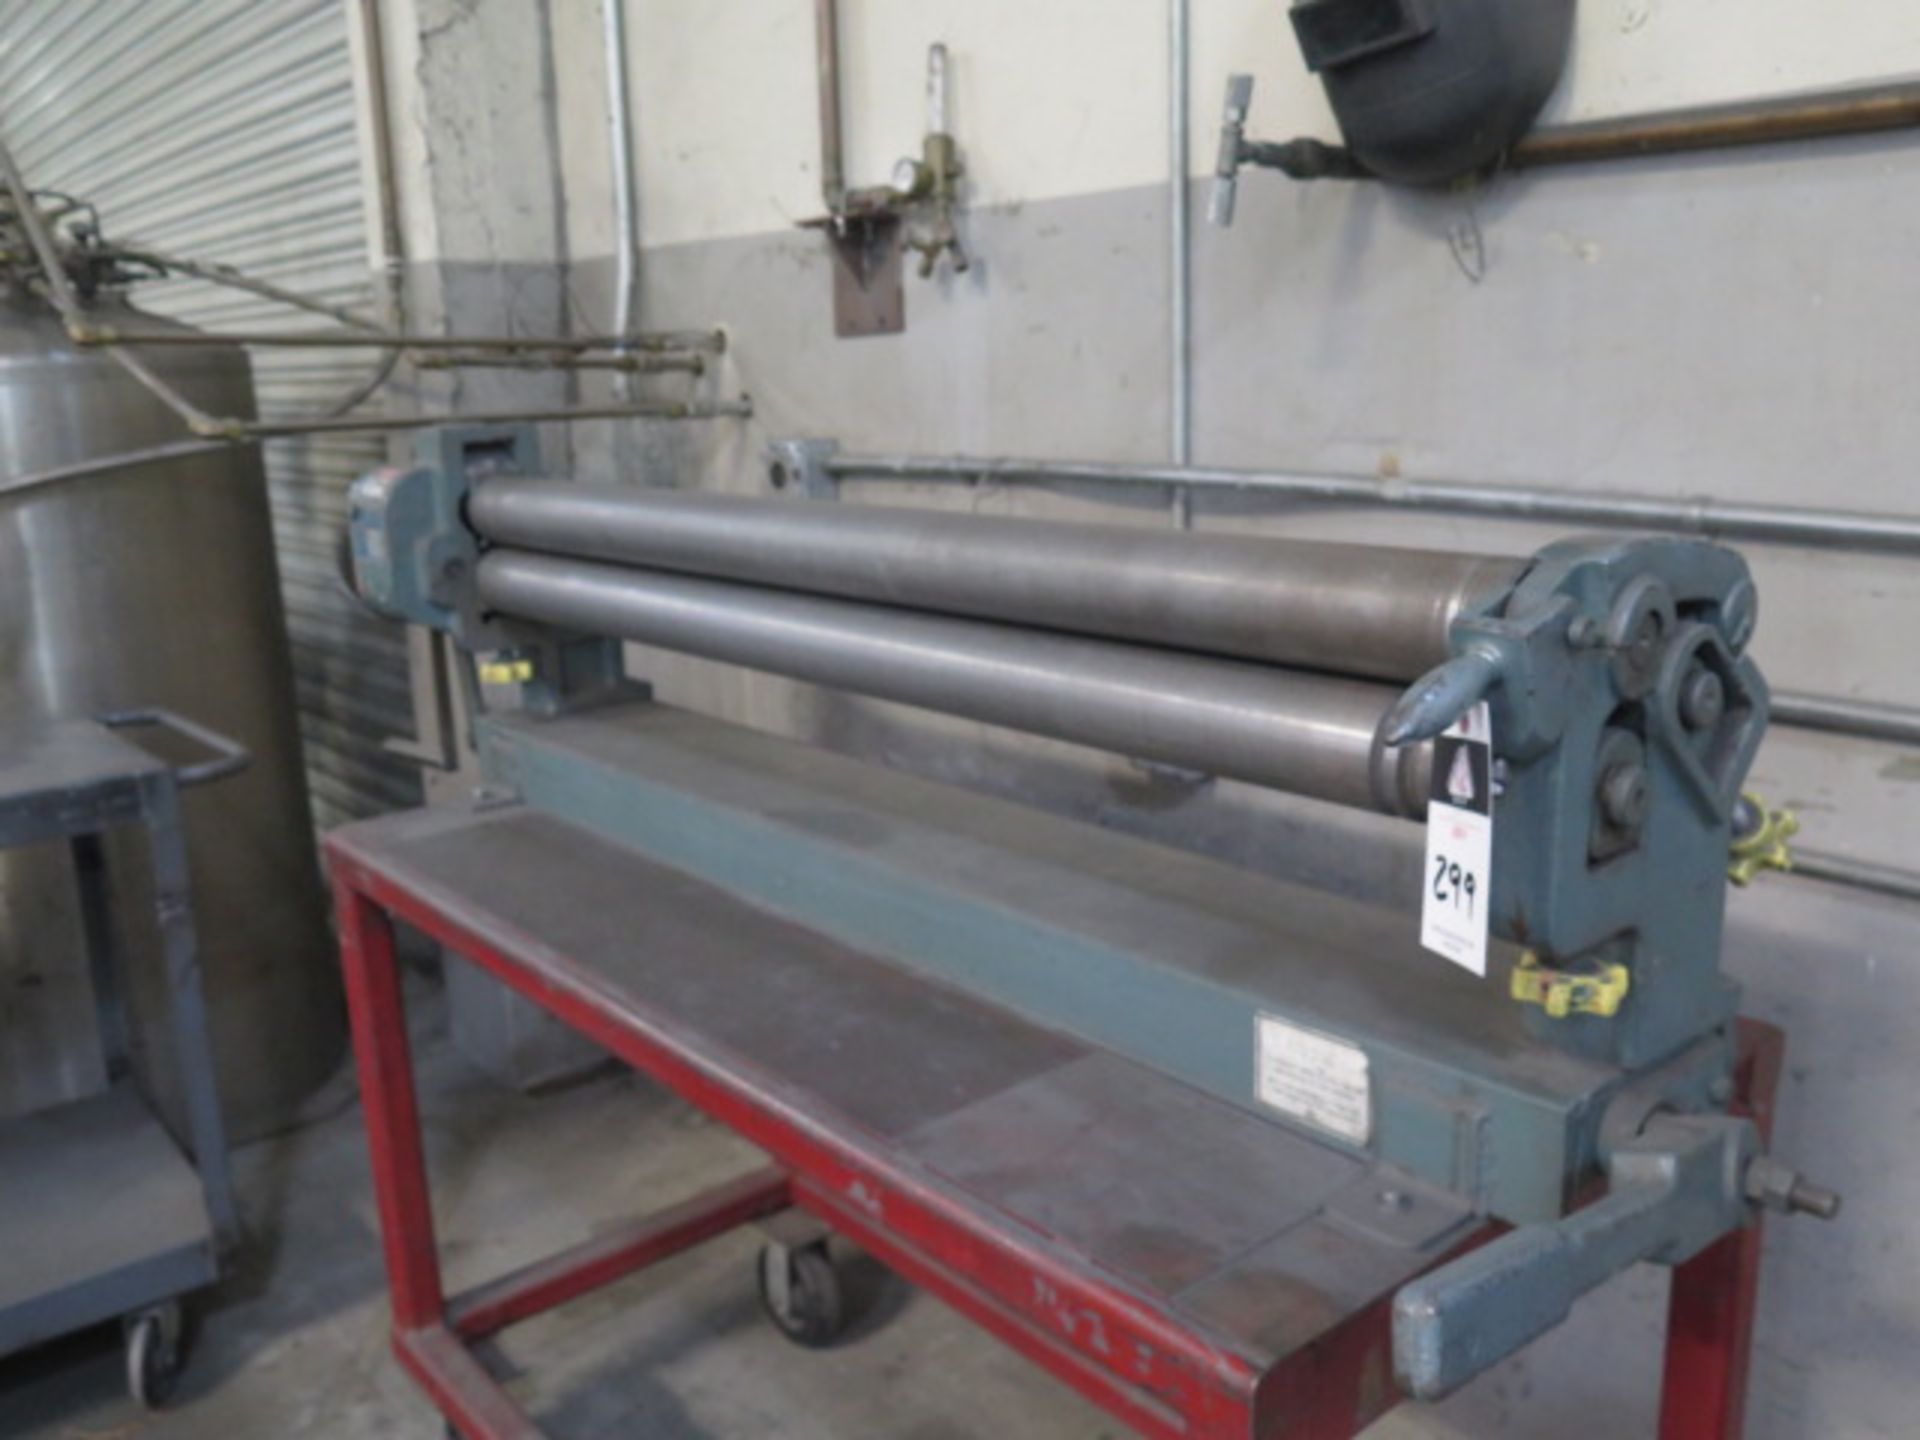 Metalex FR-S5016 50” x 16GA Hand Roll s/n 800527 w/ 3” Rolls, Roll Stand (SOLD AS-IS - NO WARRANTY) - Image 2 of 7